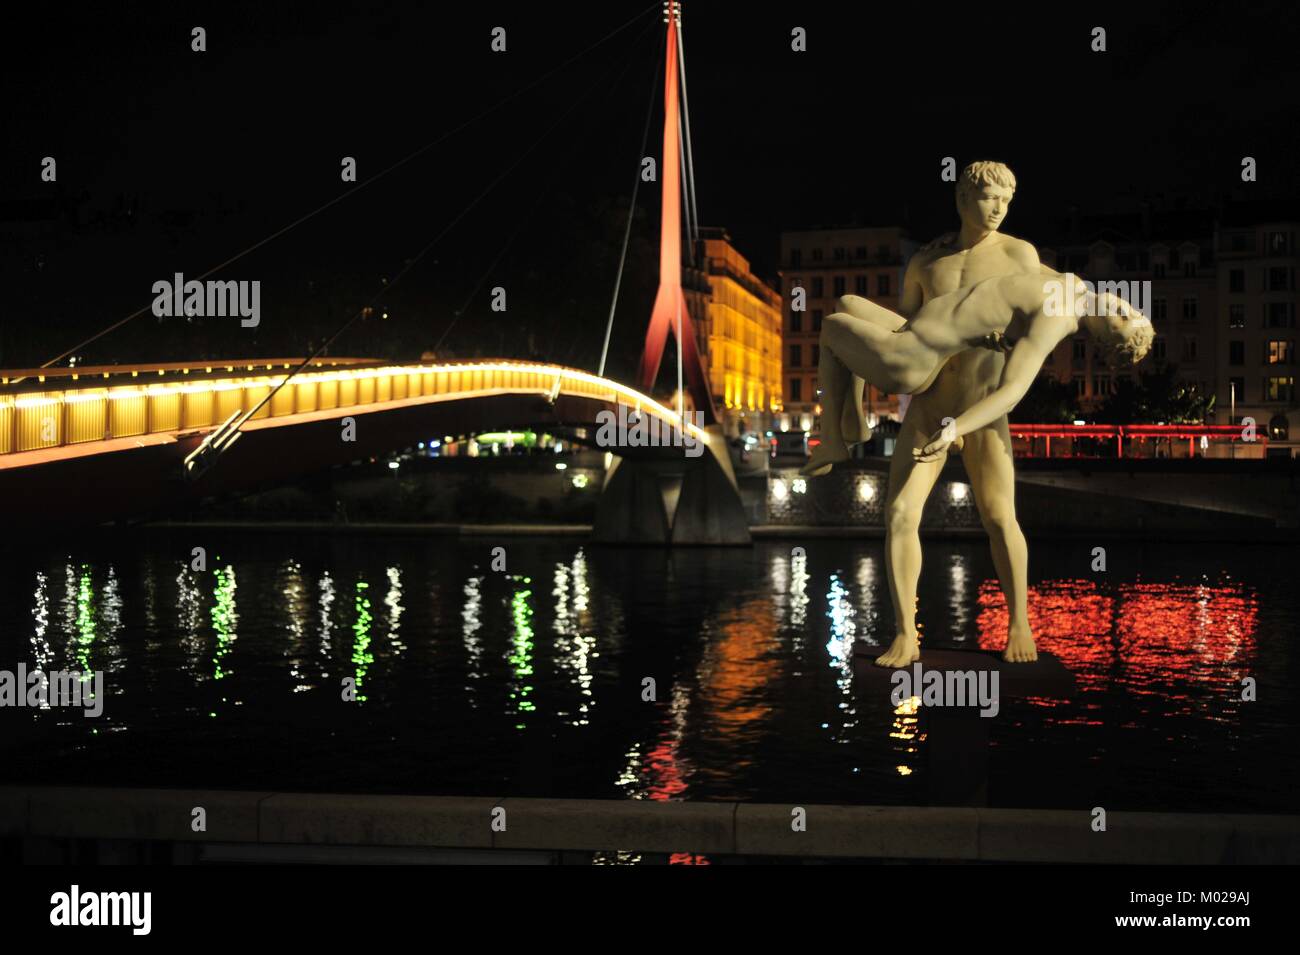 Statue "the weight of Oneself" r river Saône in Lyon calling for indvidual and civic responsibility in front of spectacular illuminated background Stock Photo